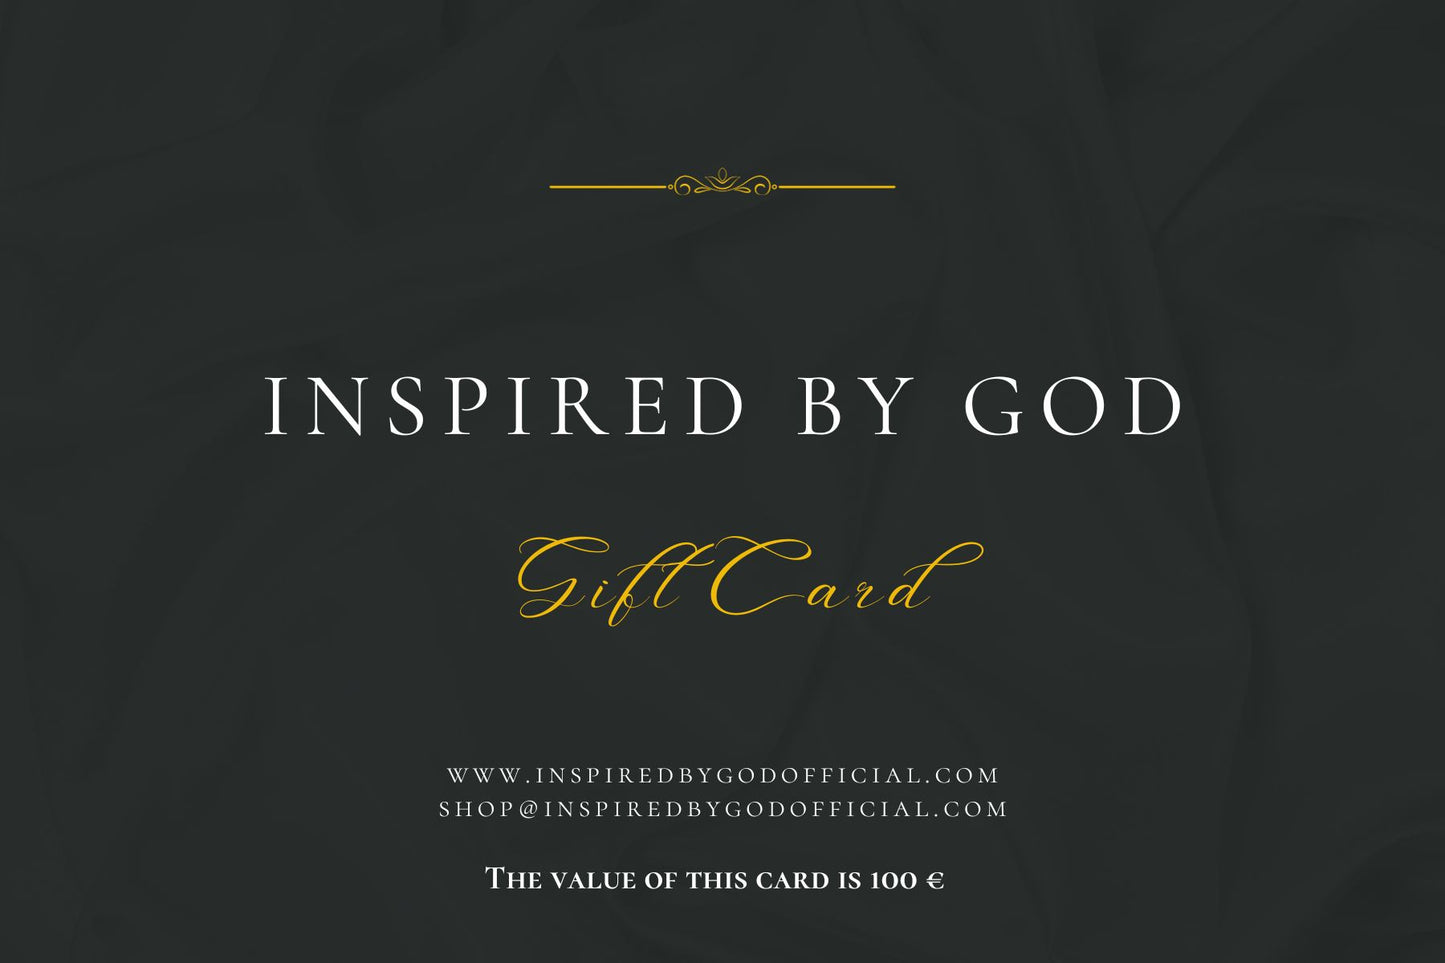 INSPIRED BY GOD GIFT CARD